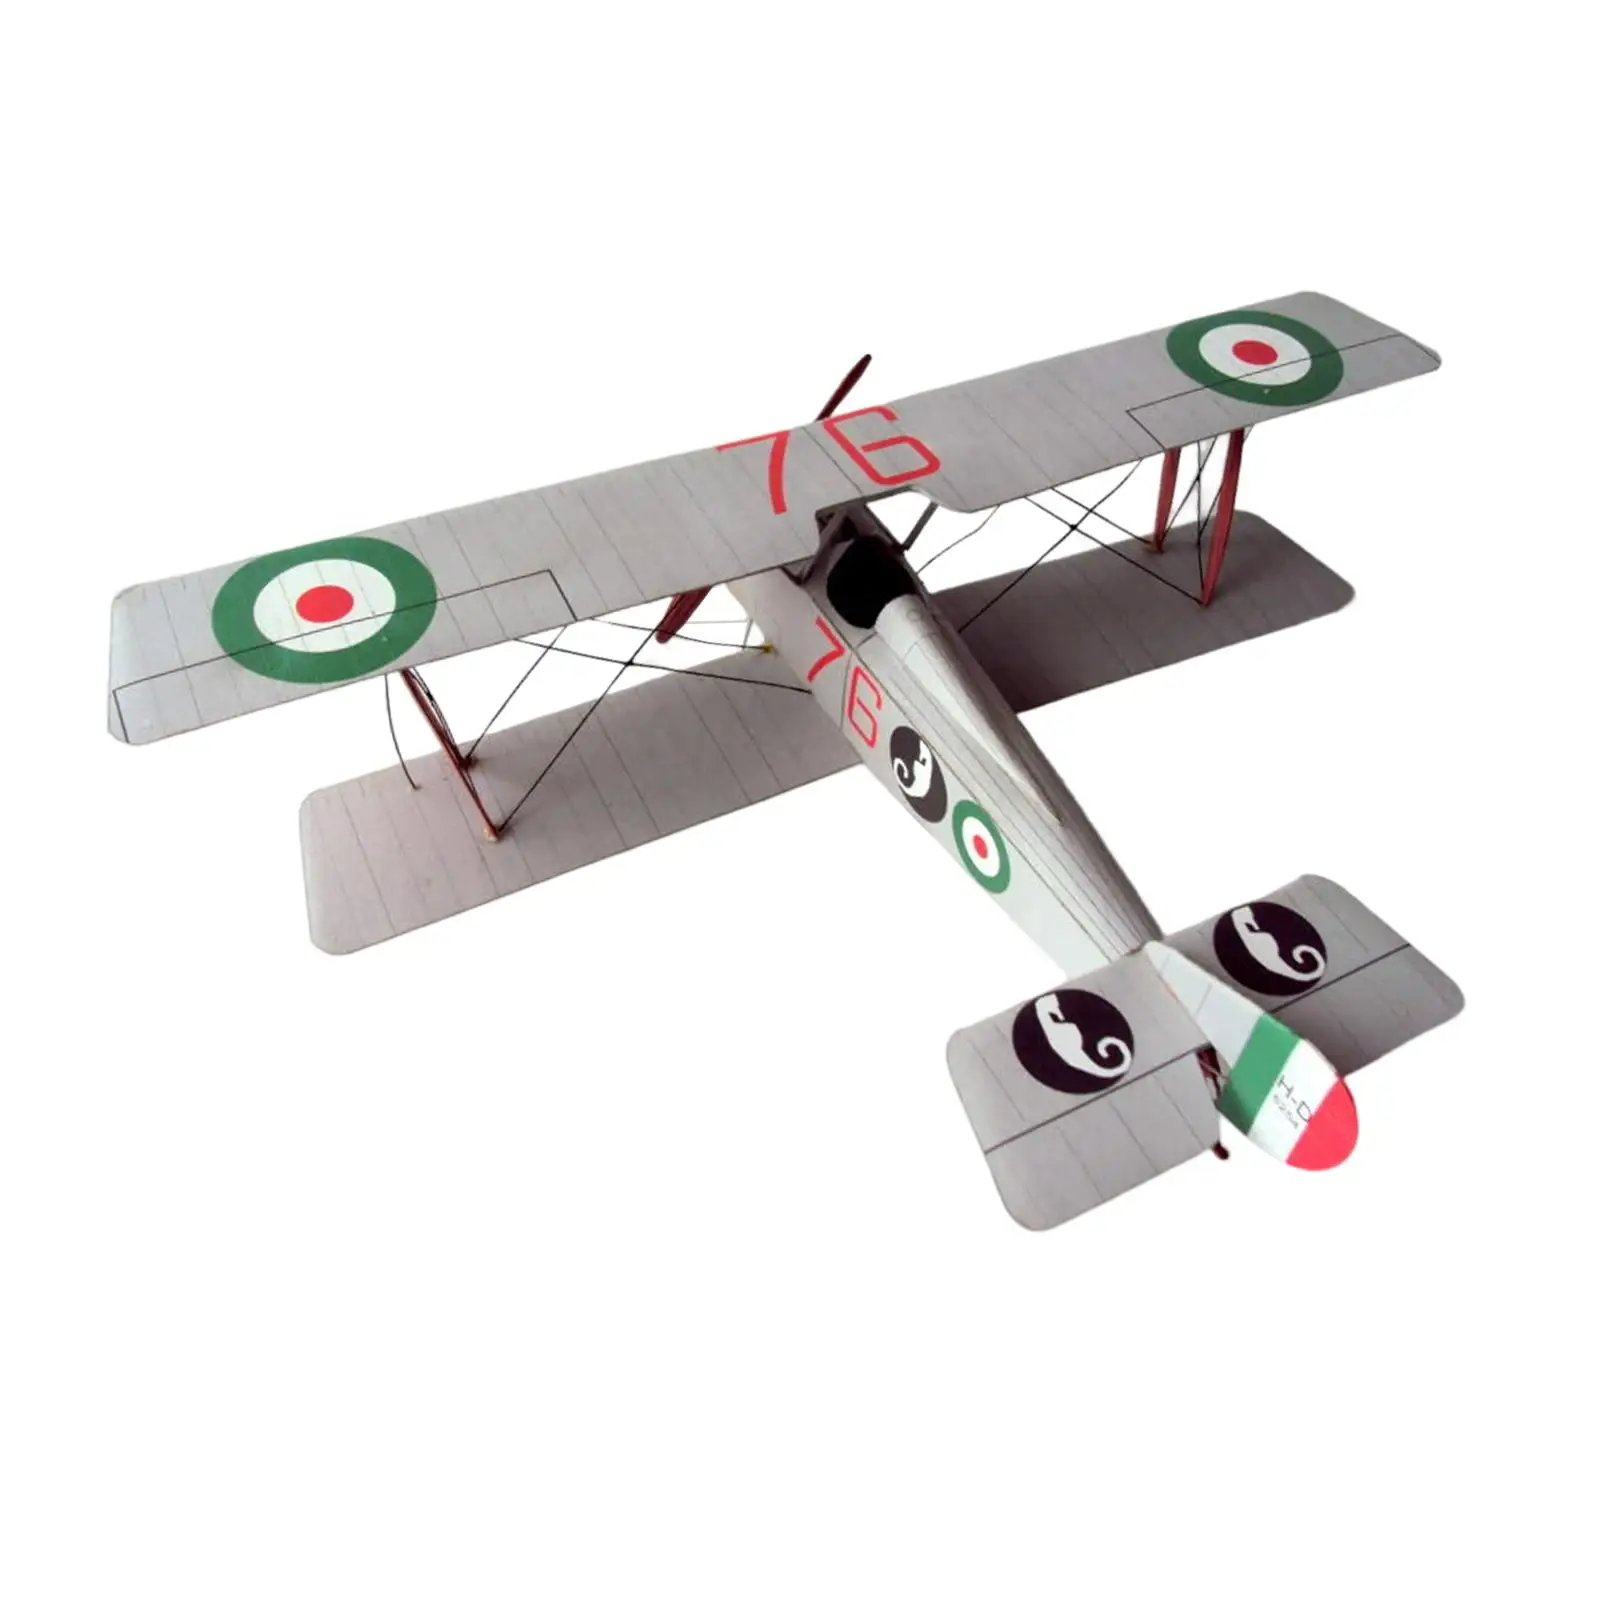 1/33 Brain Teaser Puzzle Education Toys Building Biplane Fighter DIY Assemble Toys Airplane Kits for Kids Adults Tabletop Decor